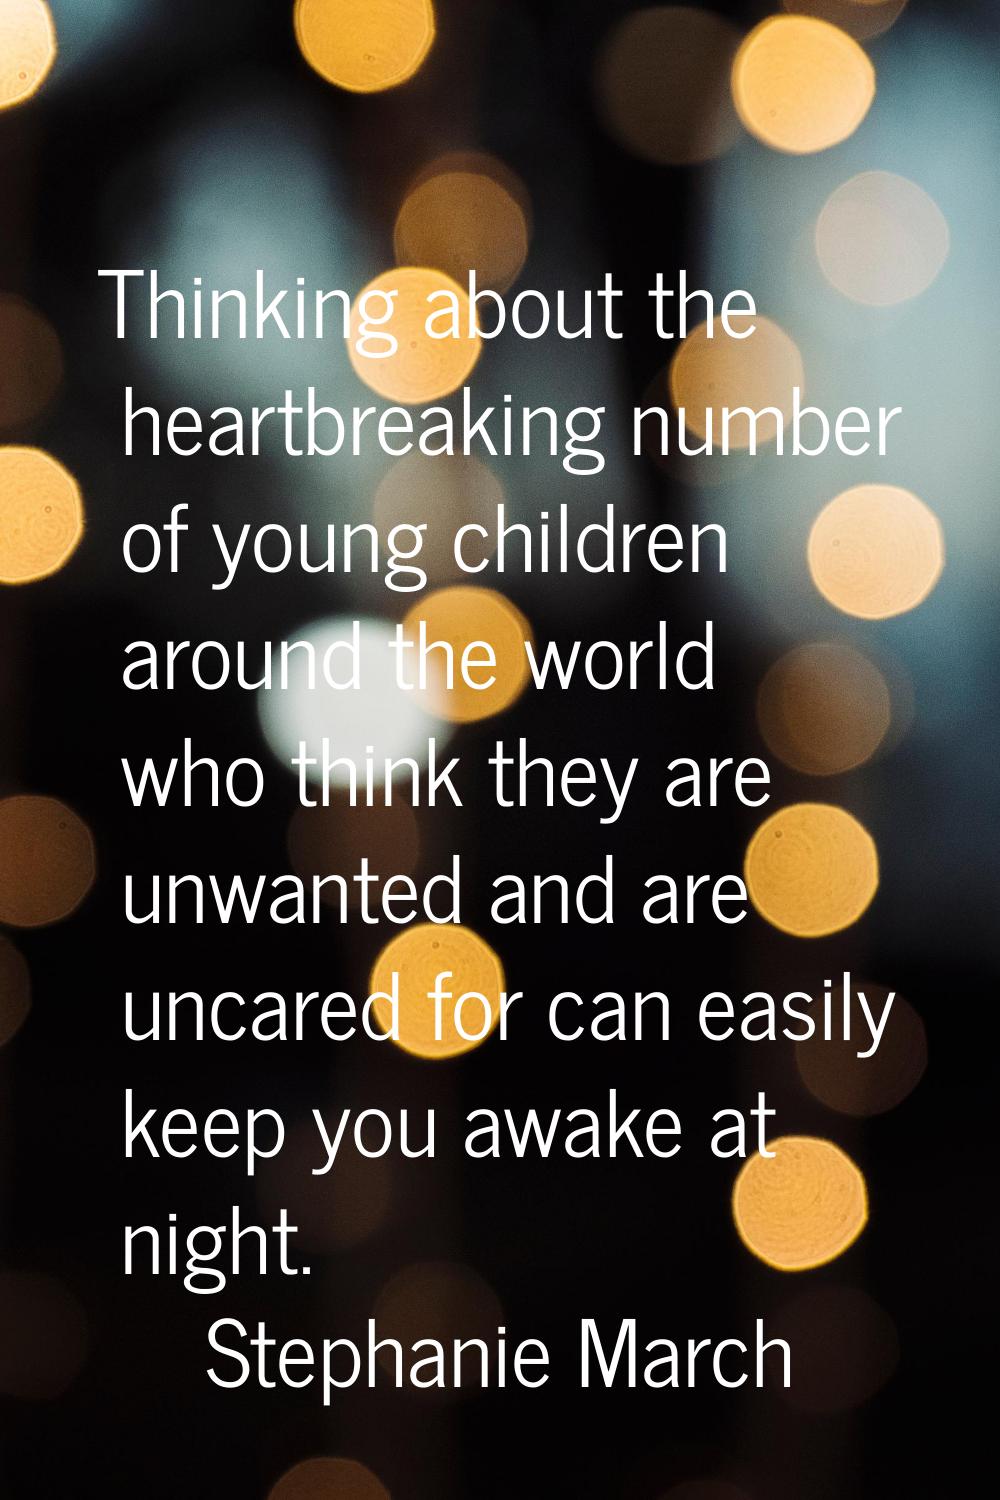 Thinking about the heartbreaking number of young children around the world who think they are unwan